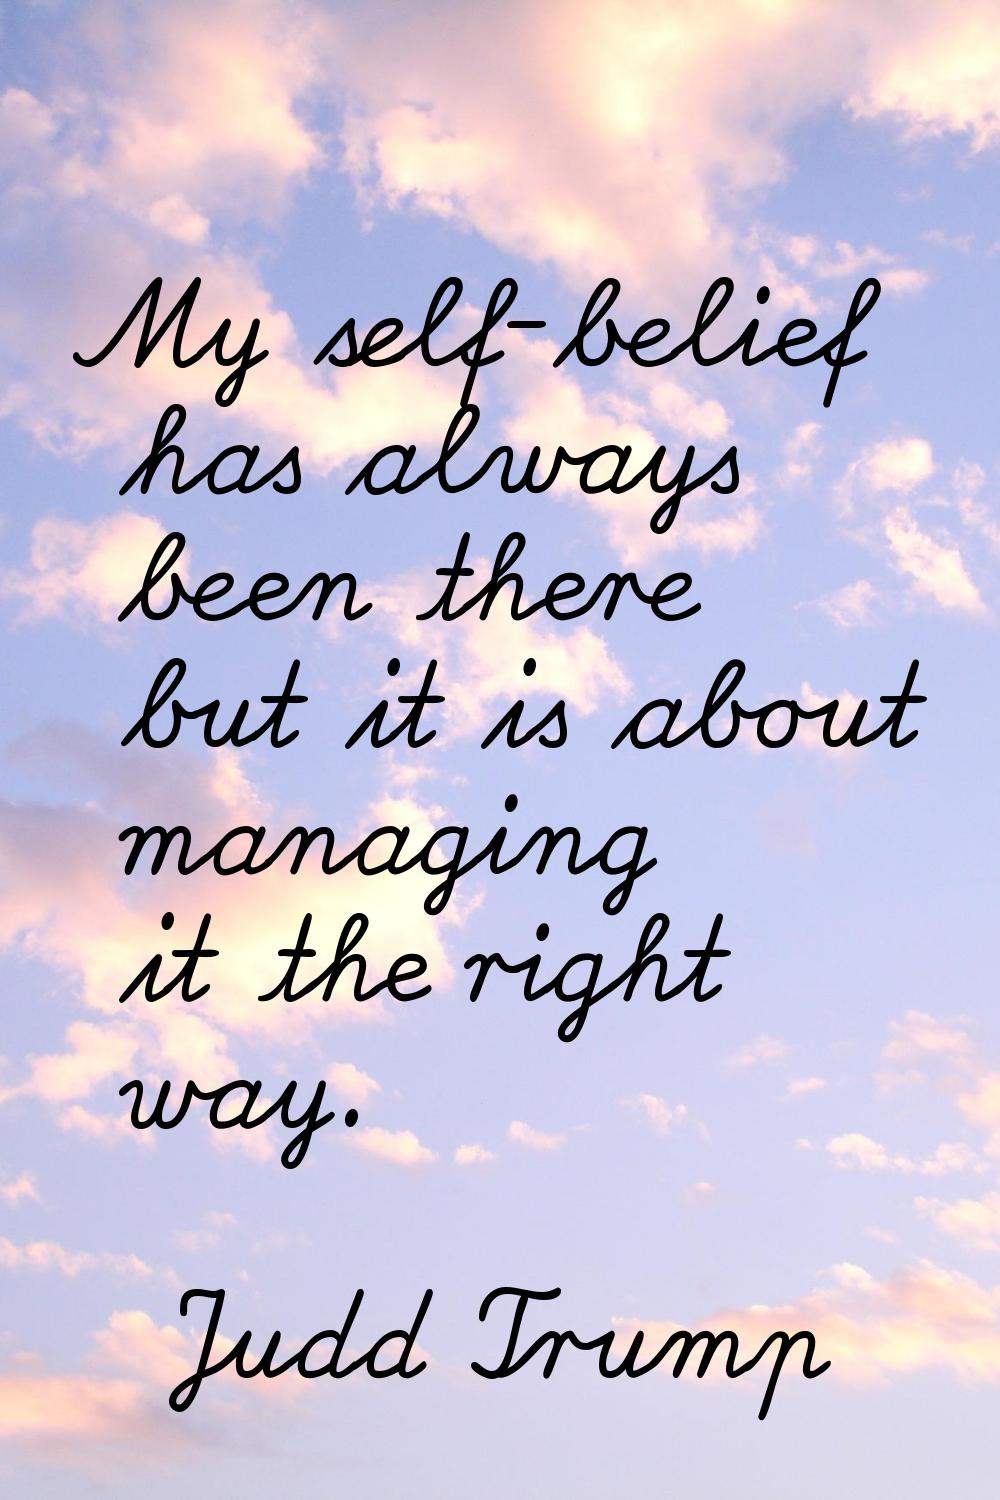 My self-belief has always been there but it is about managing it the right way.